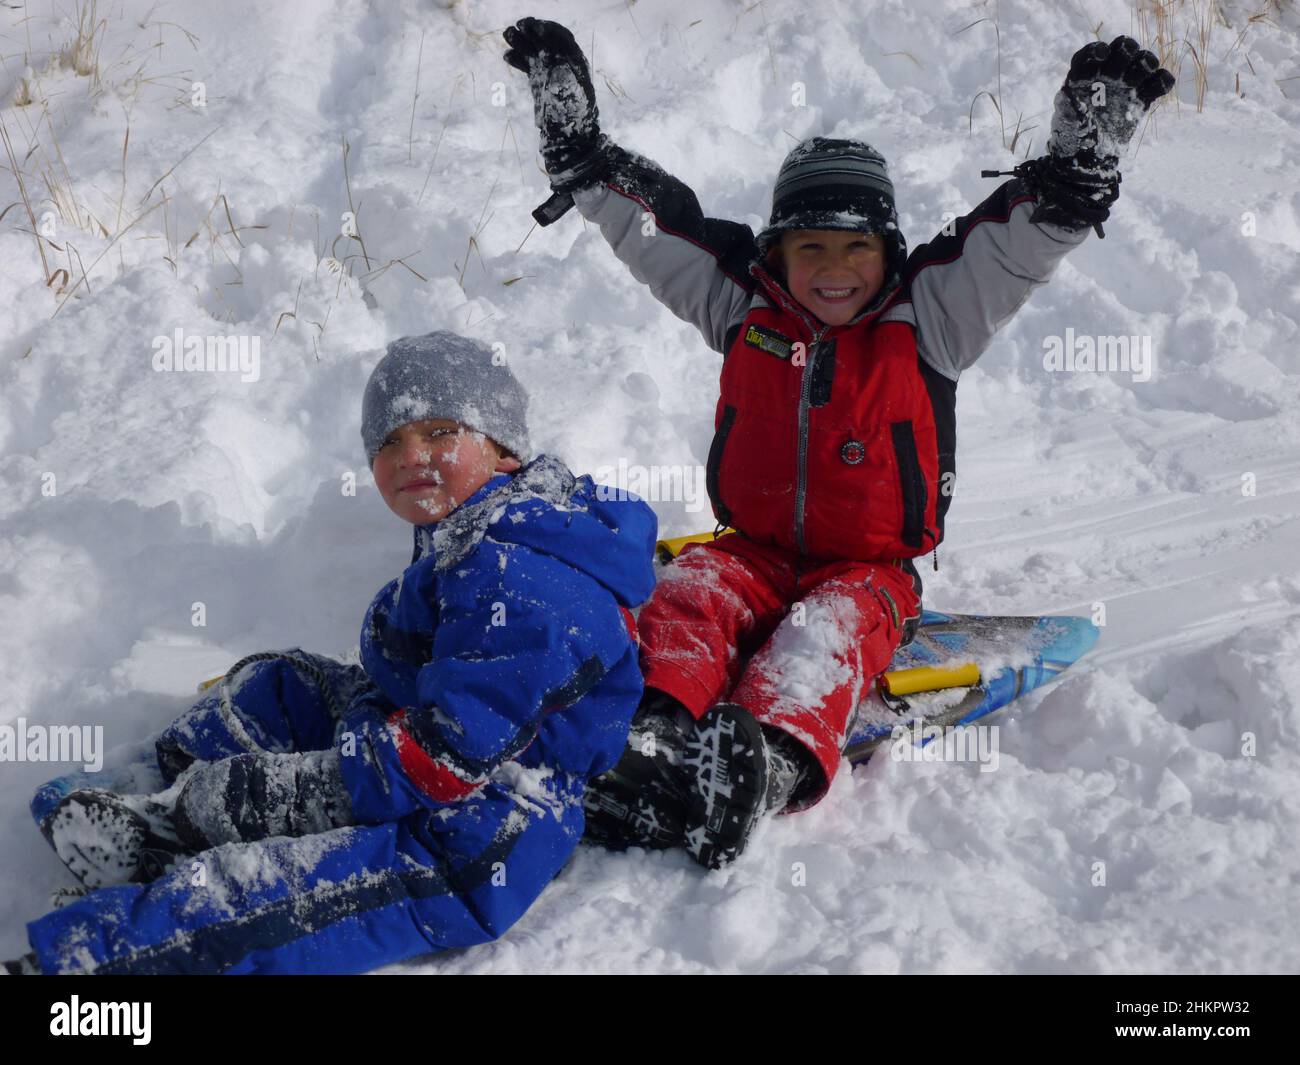 Two boys sledding in newly fallen snow.  One boy is delighted, the other not so much.  This picture exhibits 'victory and defeat'. Stock Photo